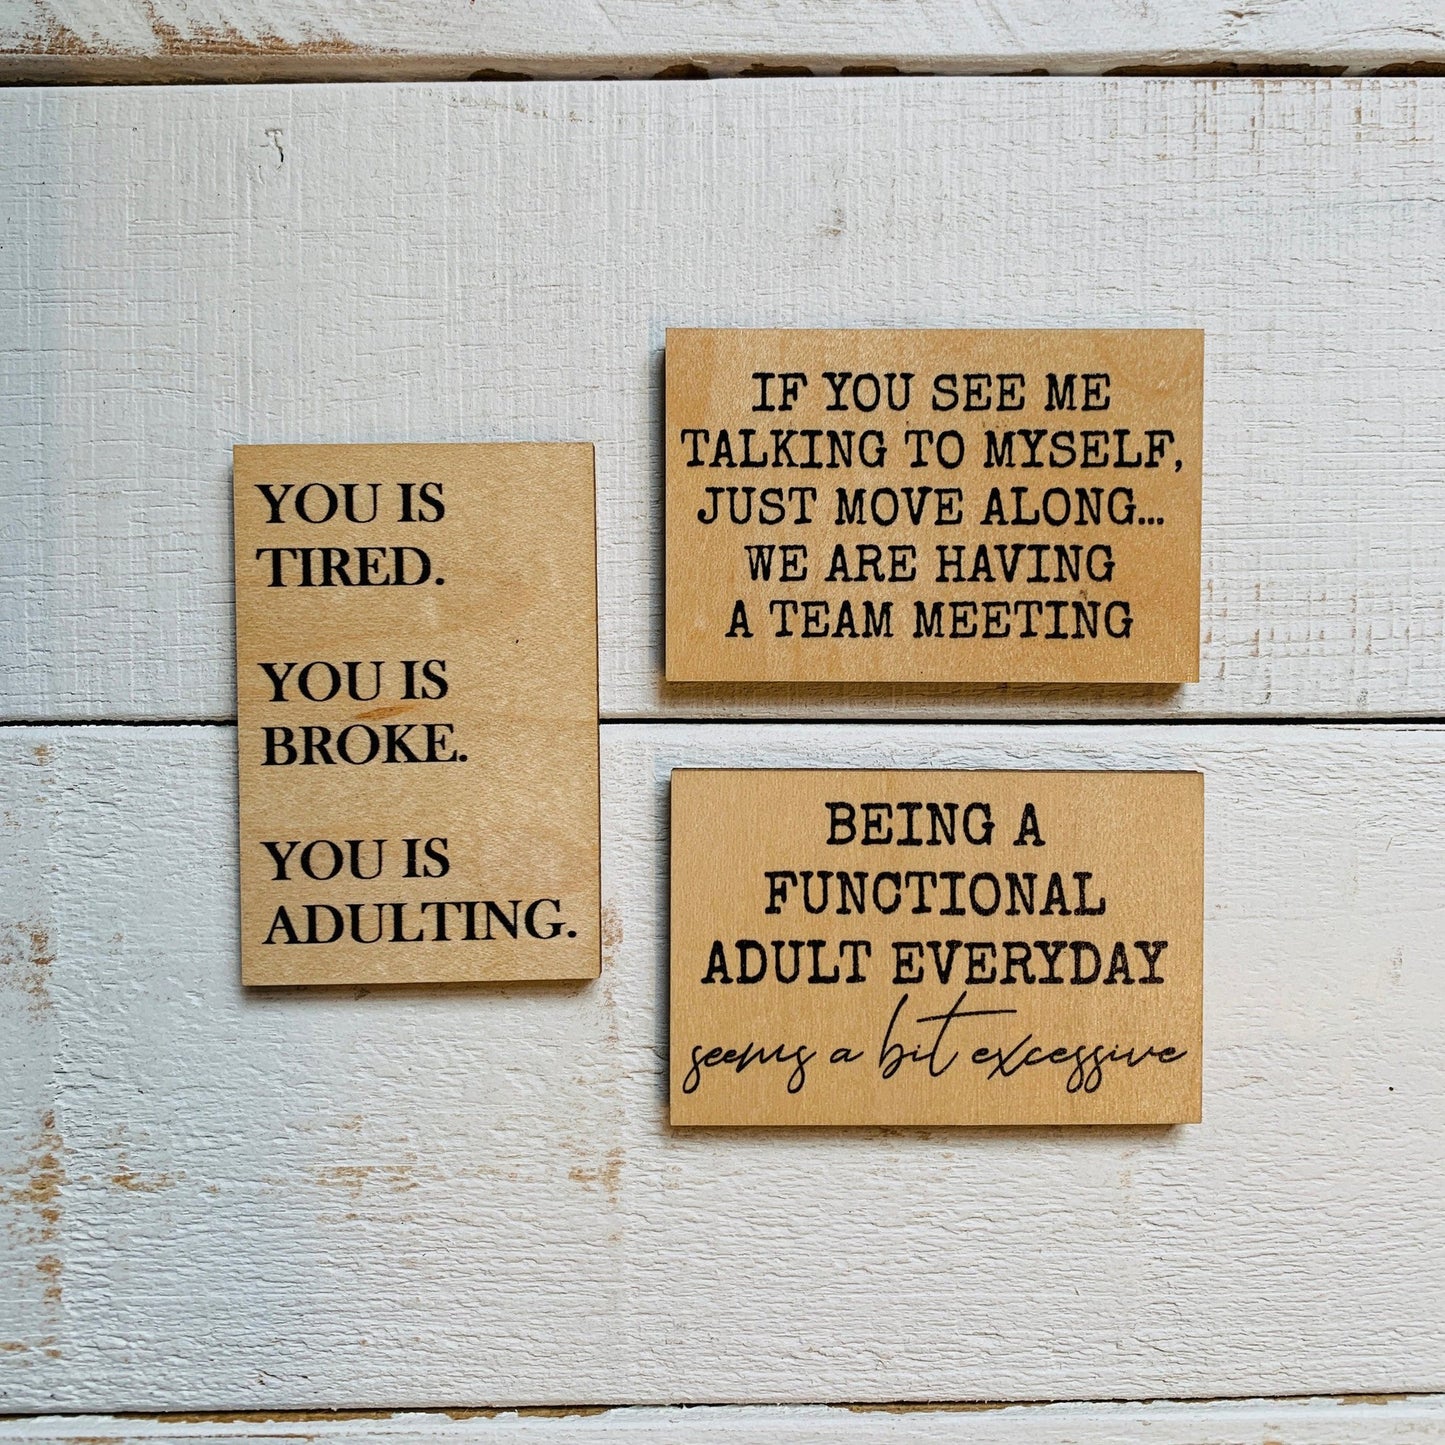 You Is Tired. You Is Broke. You Is Adulting. Funny Wood Refrigerator Magnet | 2" x 3"